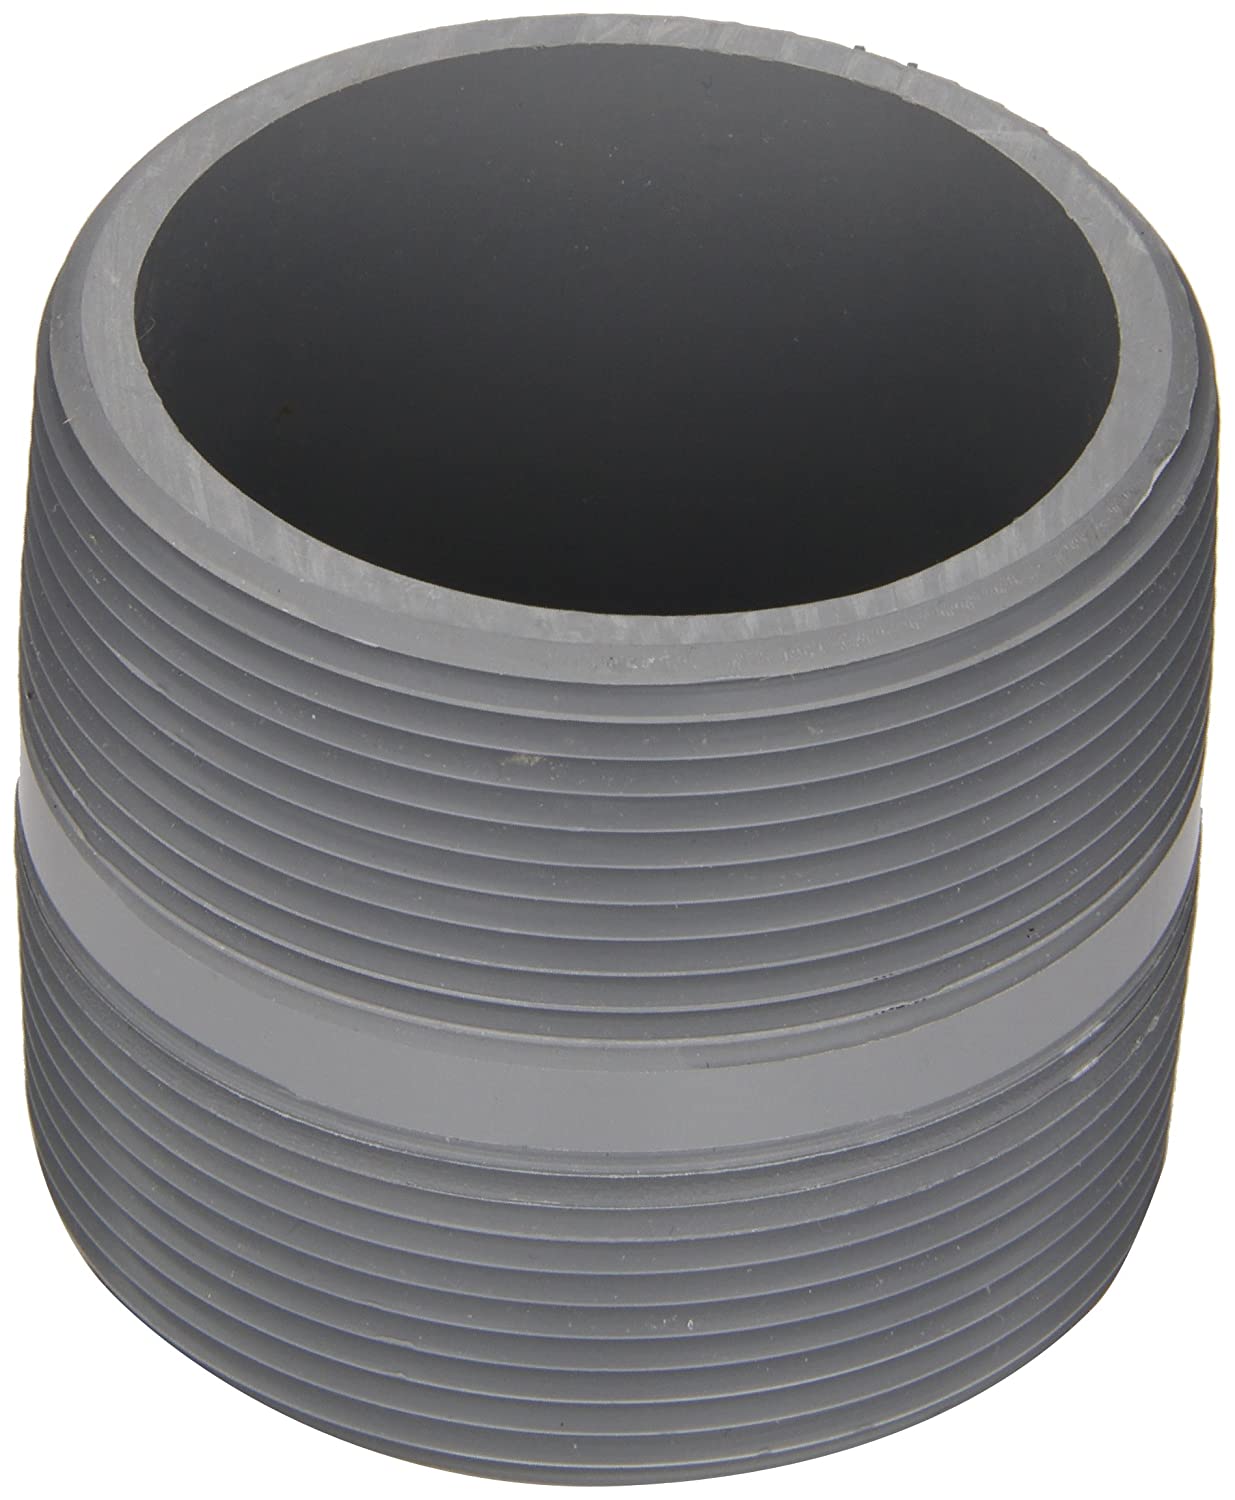 Spears 882-020C - CPVC Pipe Fitting, Nipple, Schedule 80, Gray, 1/2" NPT Male, 2" Length